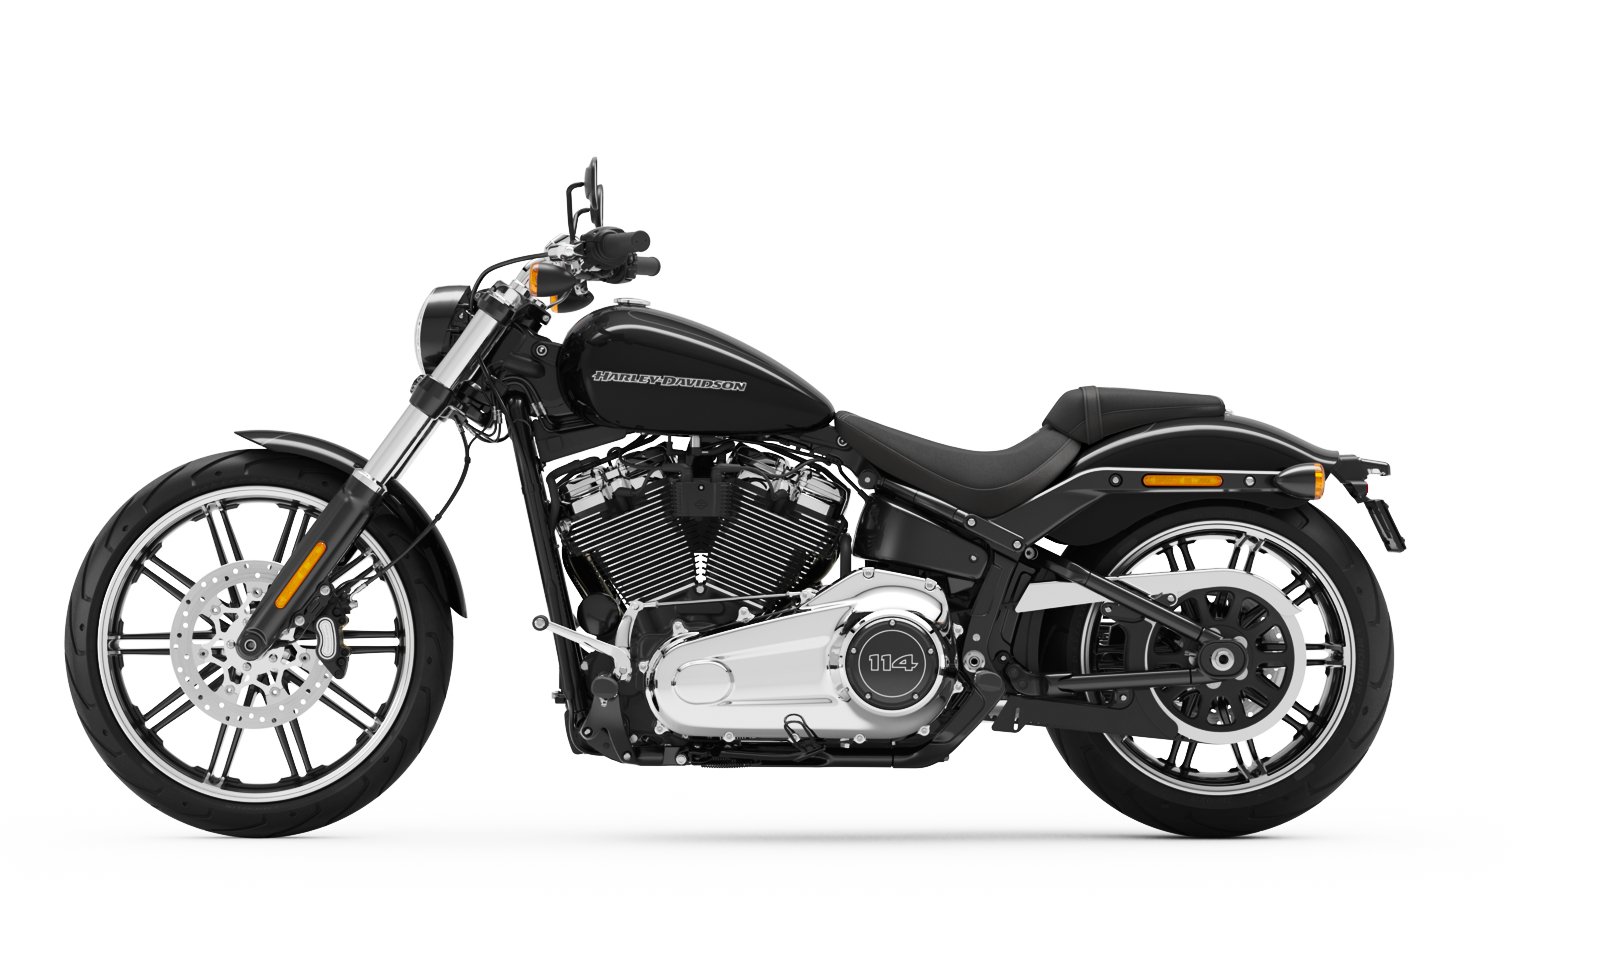 Used 2013 Harley Davidson Softail Breakout Motorcycles For Sale Youtube